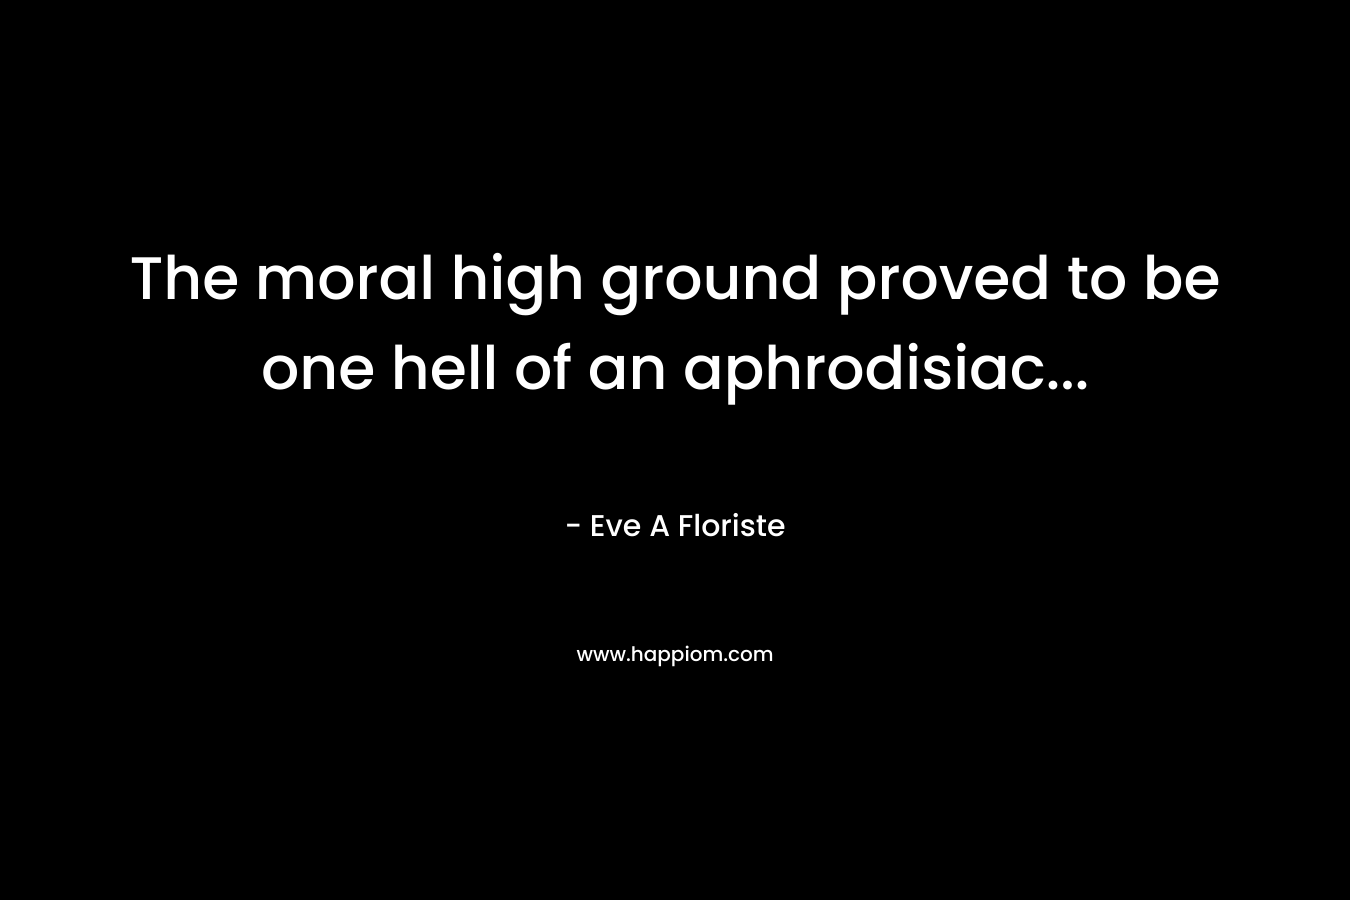 The moral high ground proved to be one hell of an aphrodisiac… – Eve A Floriste